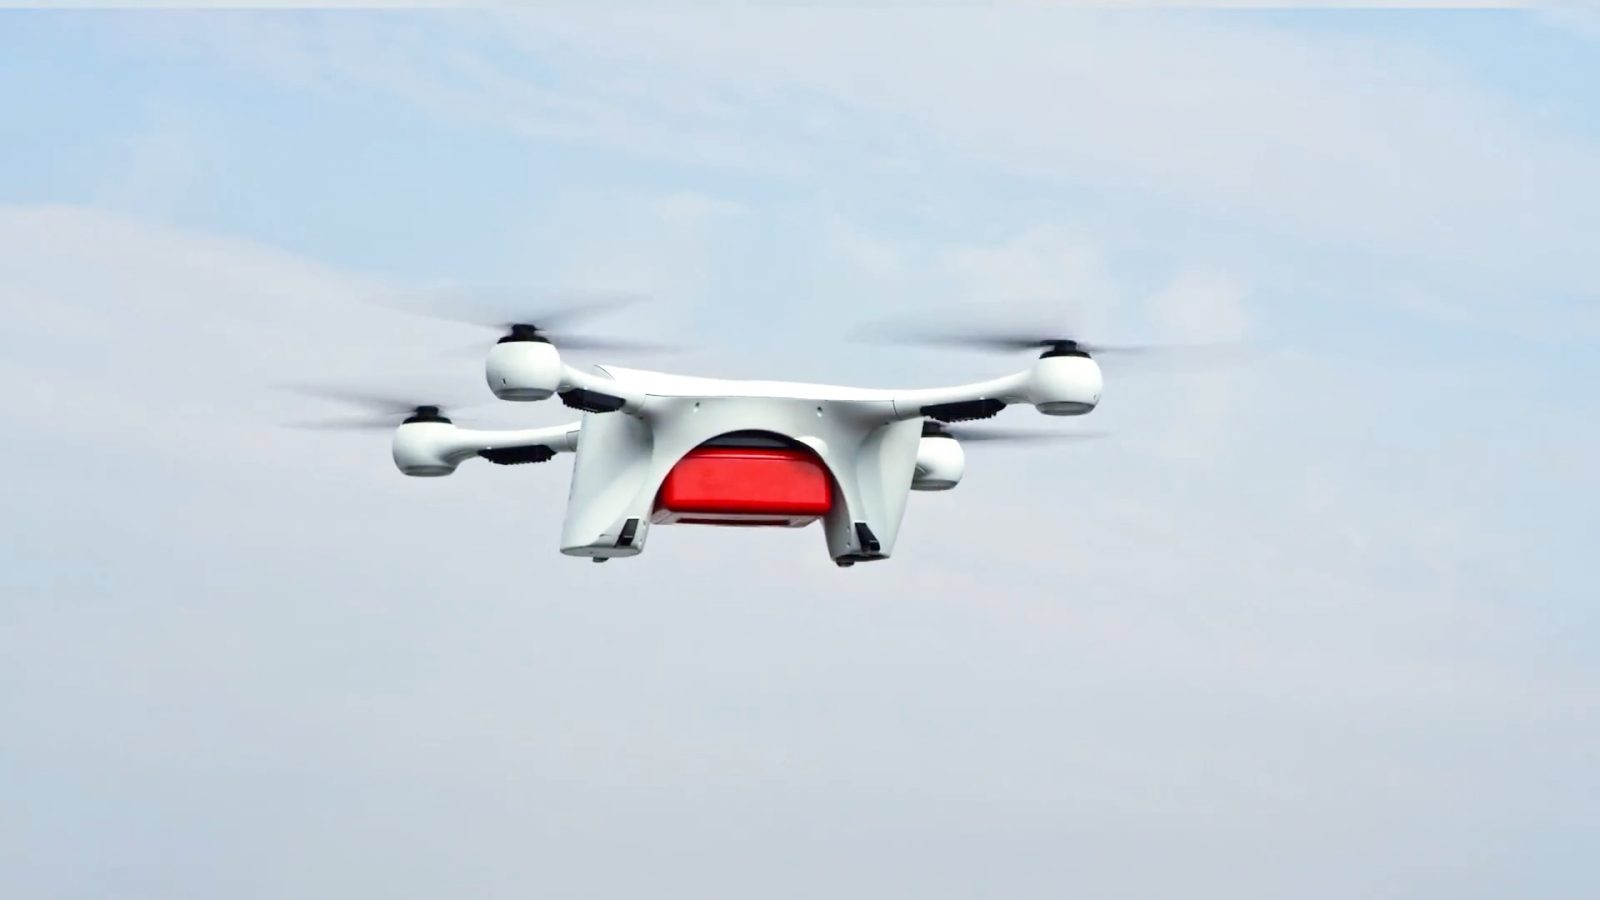 Matternet looks to push forward with peer-to-peer drone deliveries after raising $16 million